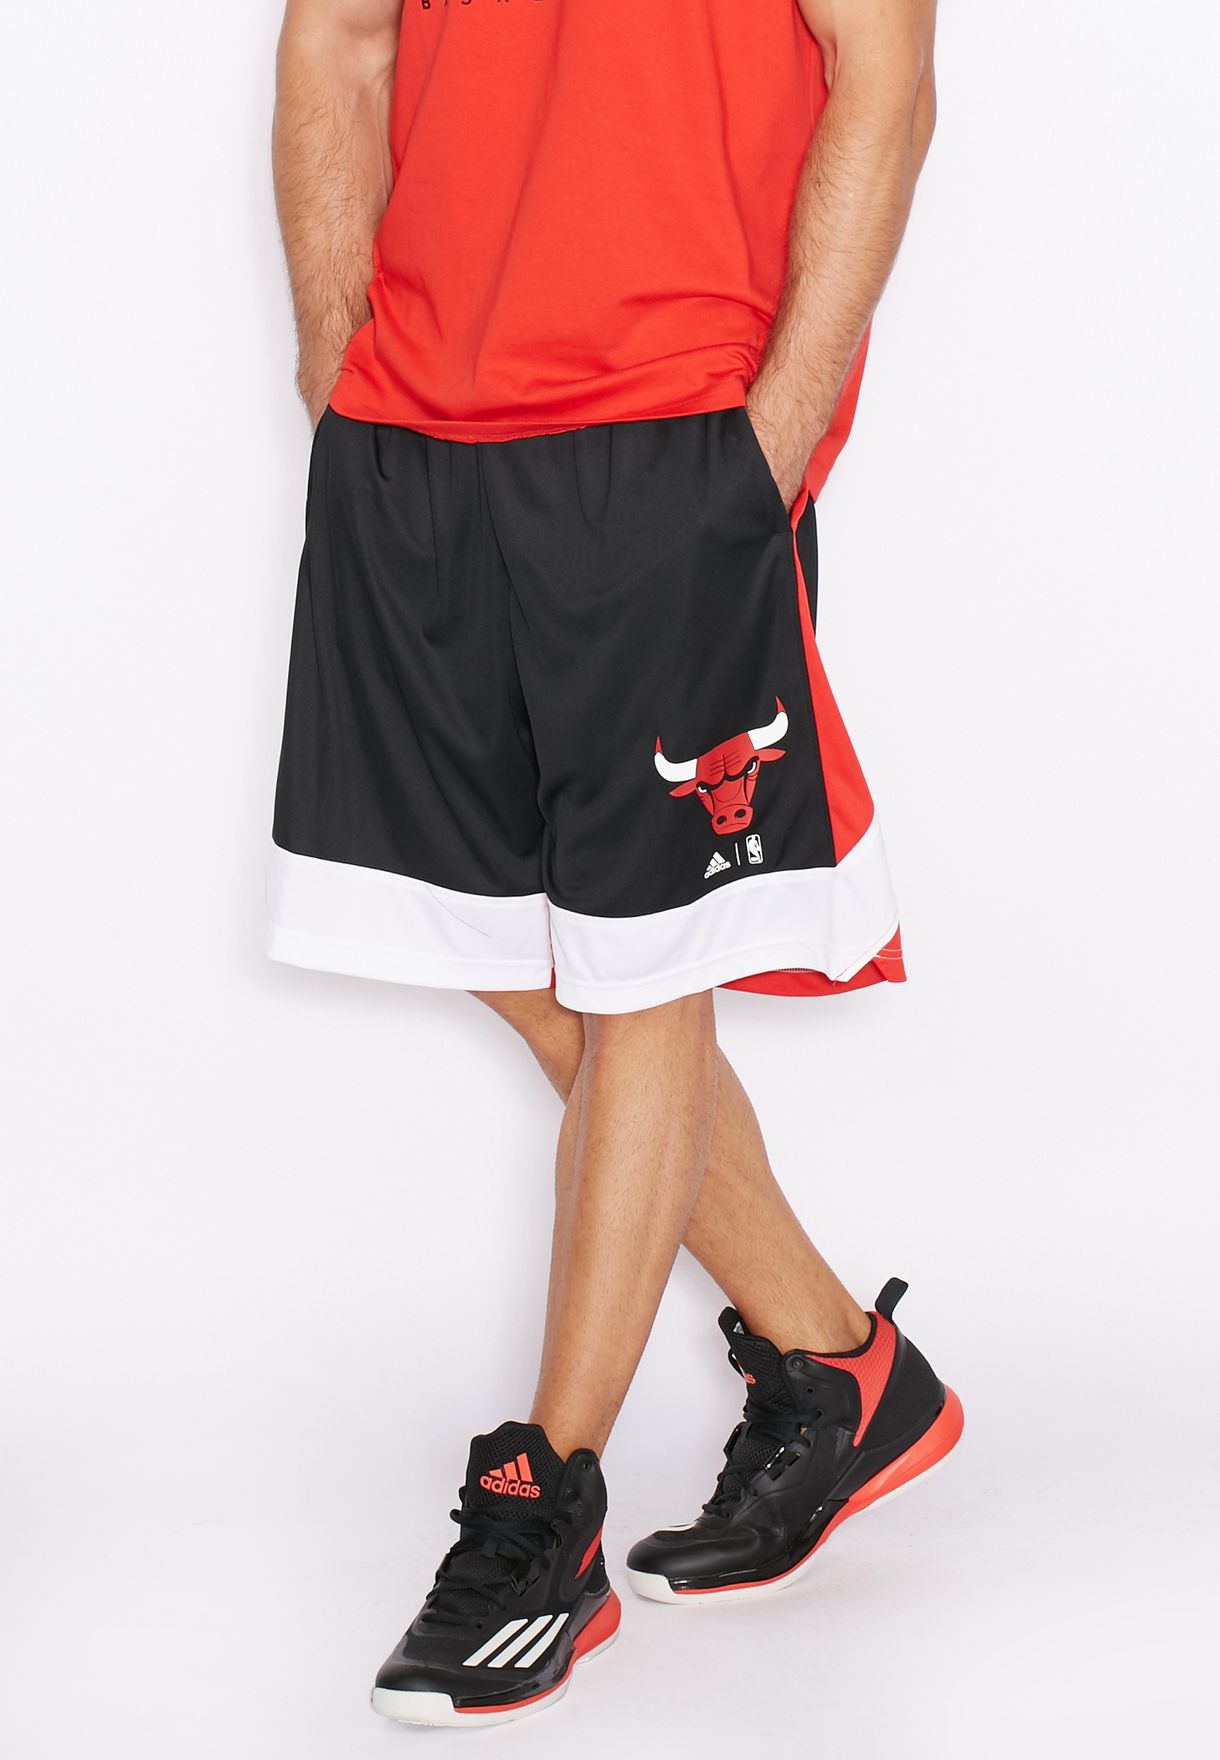 Tomar un baño Colectivo A bordo Buy adidas black Chicago Bulls Shorts for Men in Kuwait city, other cities